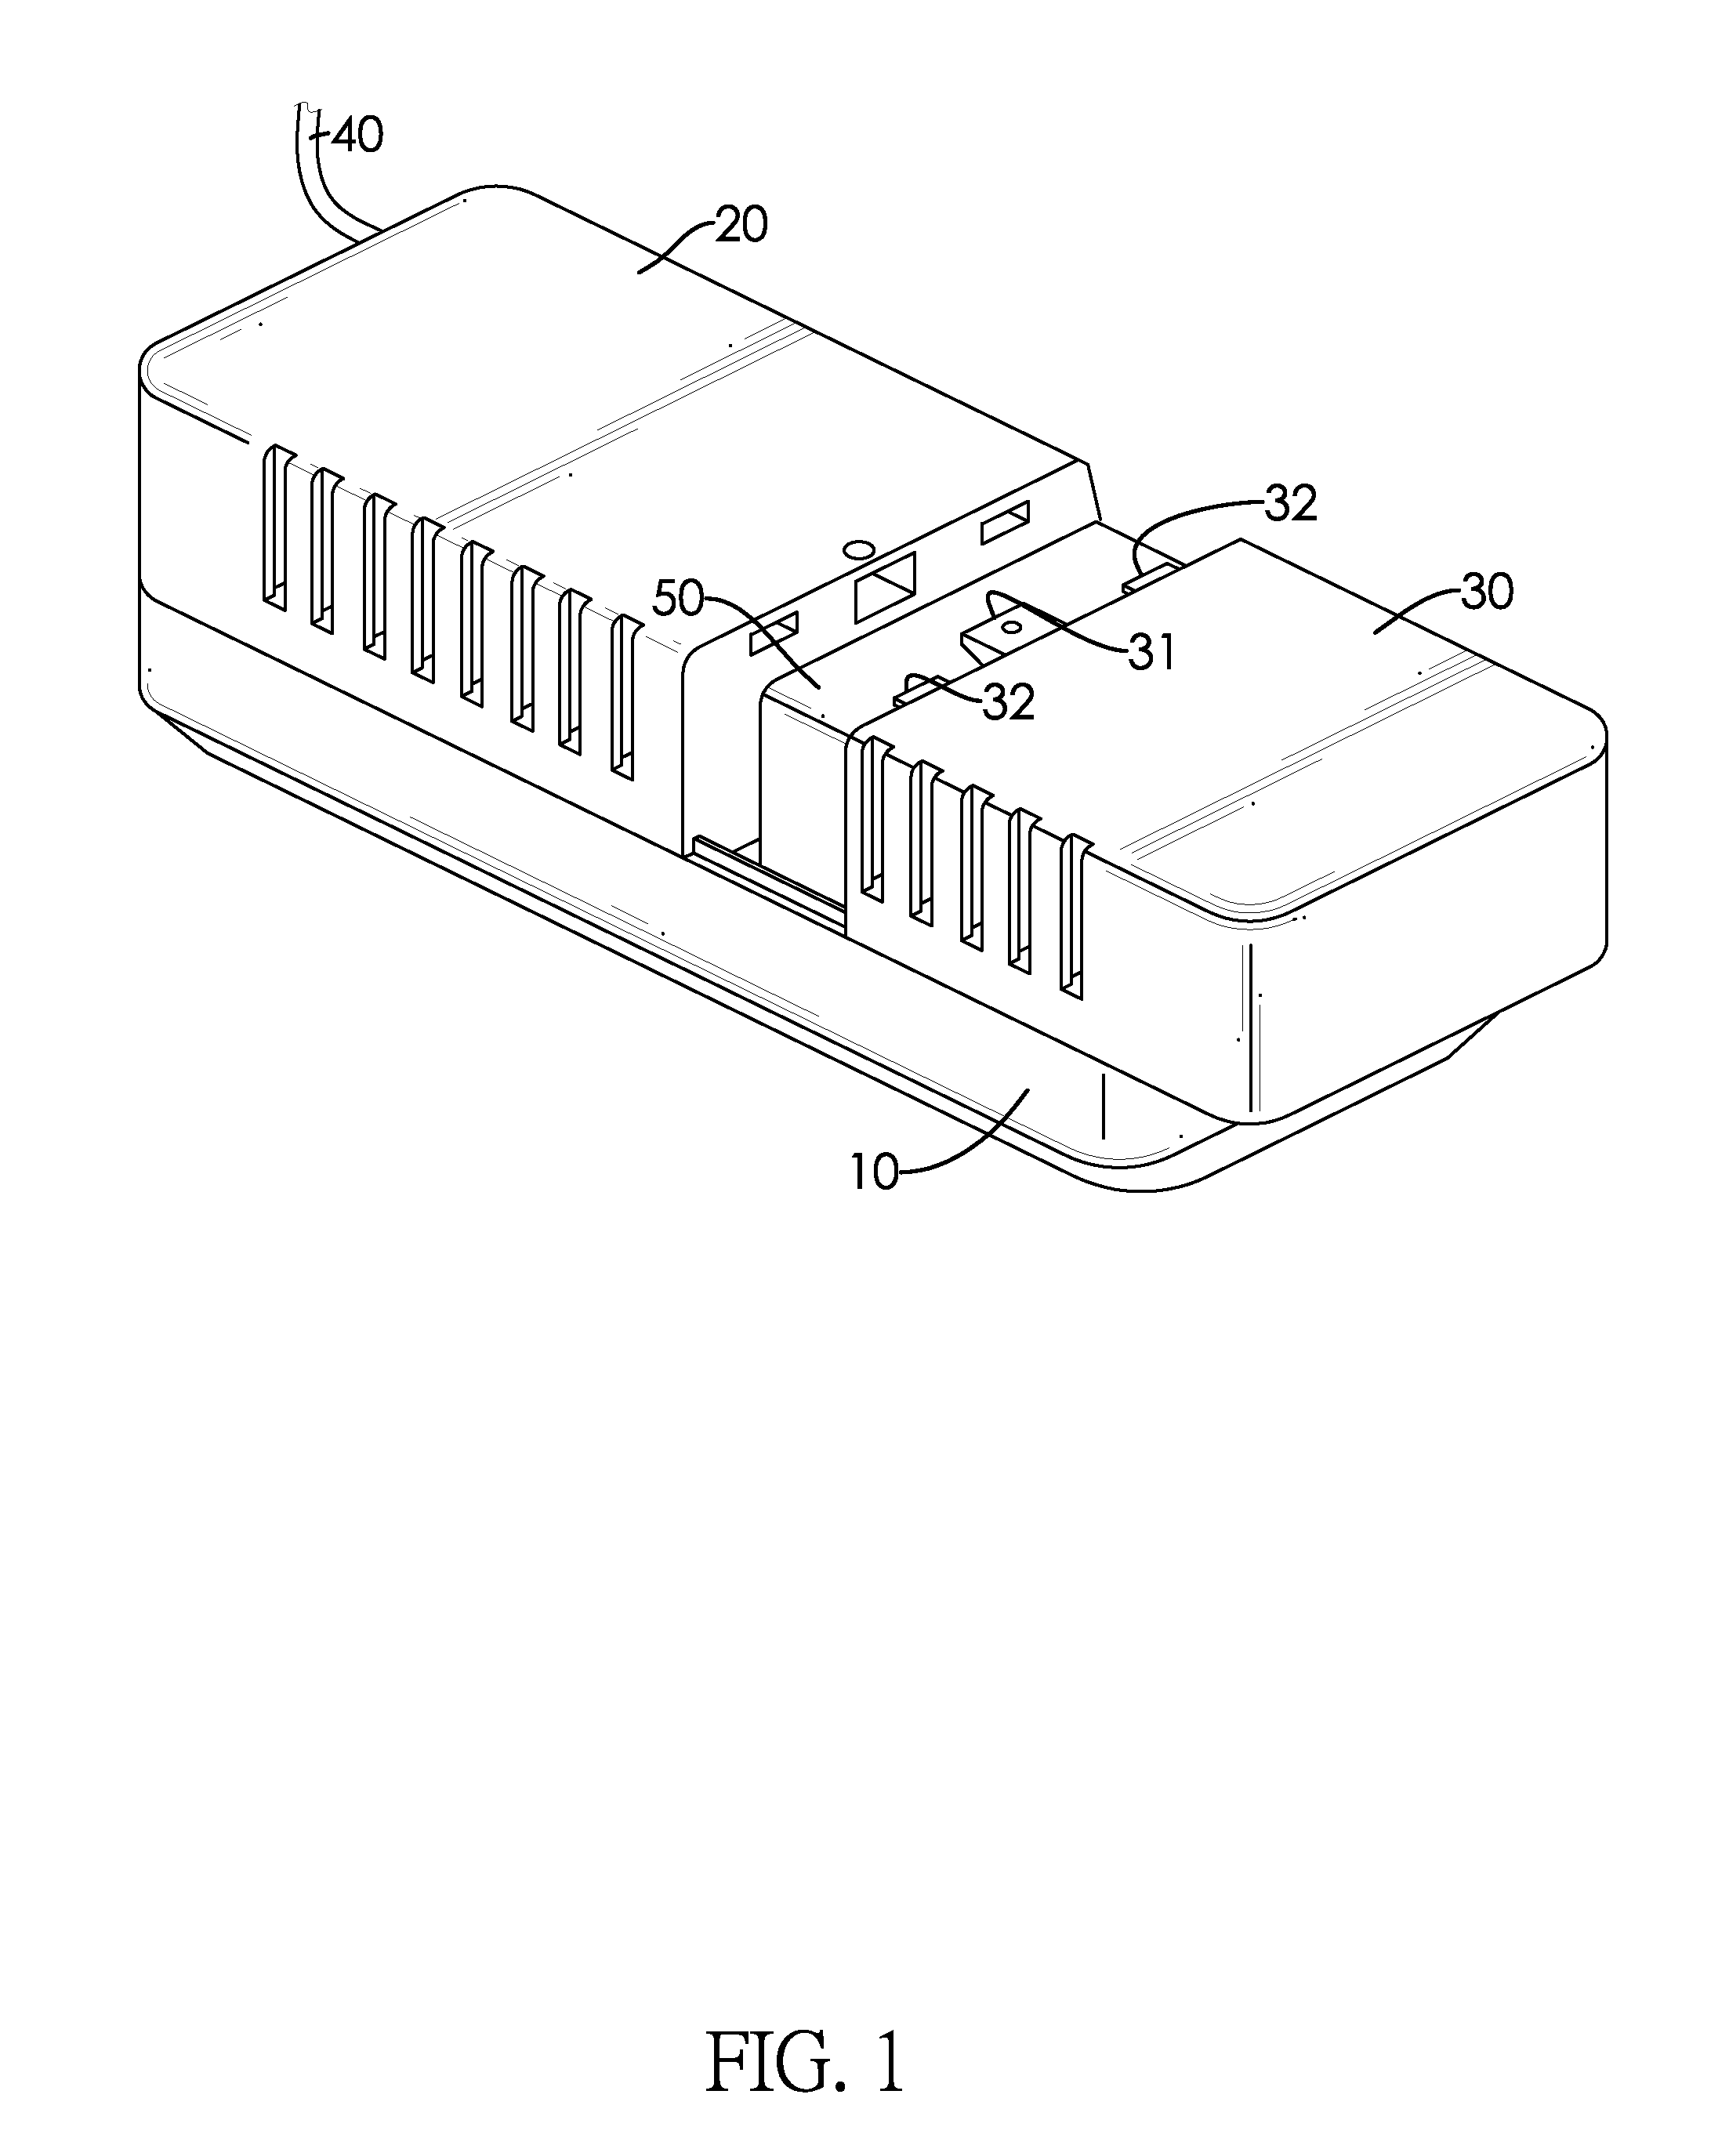 Uninterruptible power supply with a power isolation circuit loop